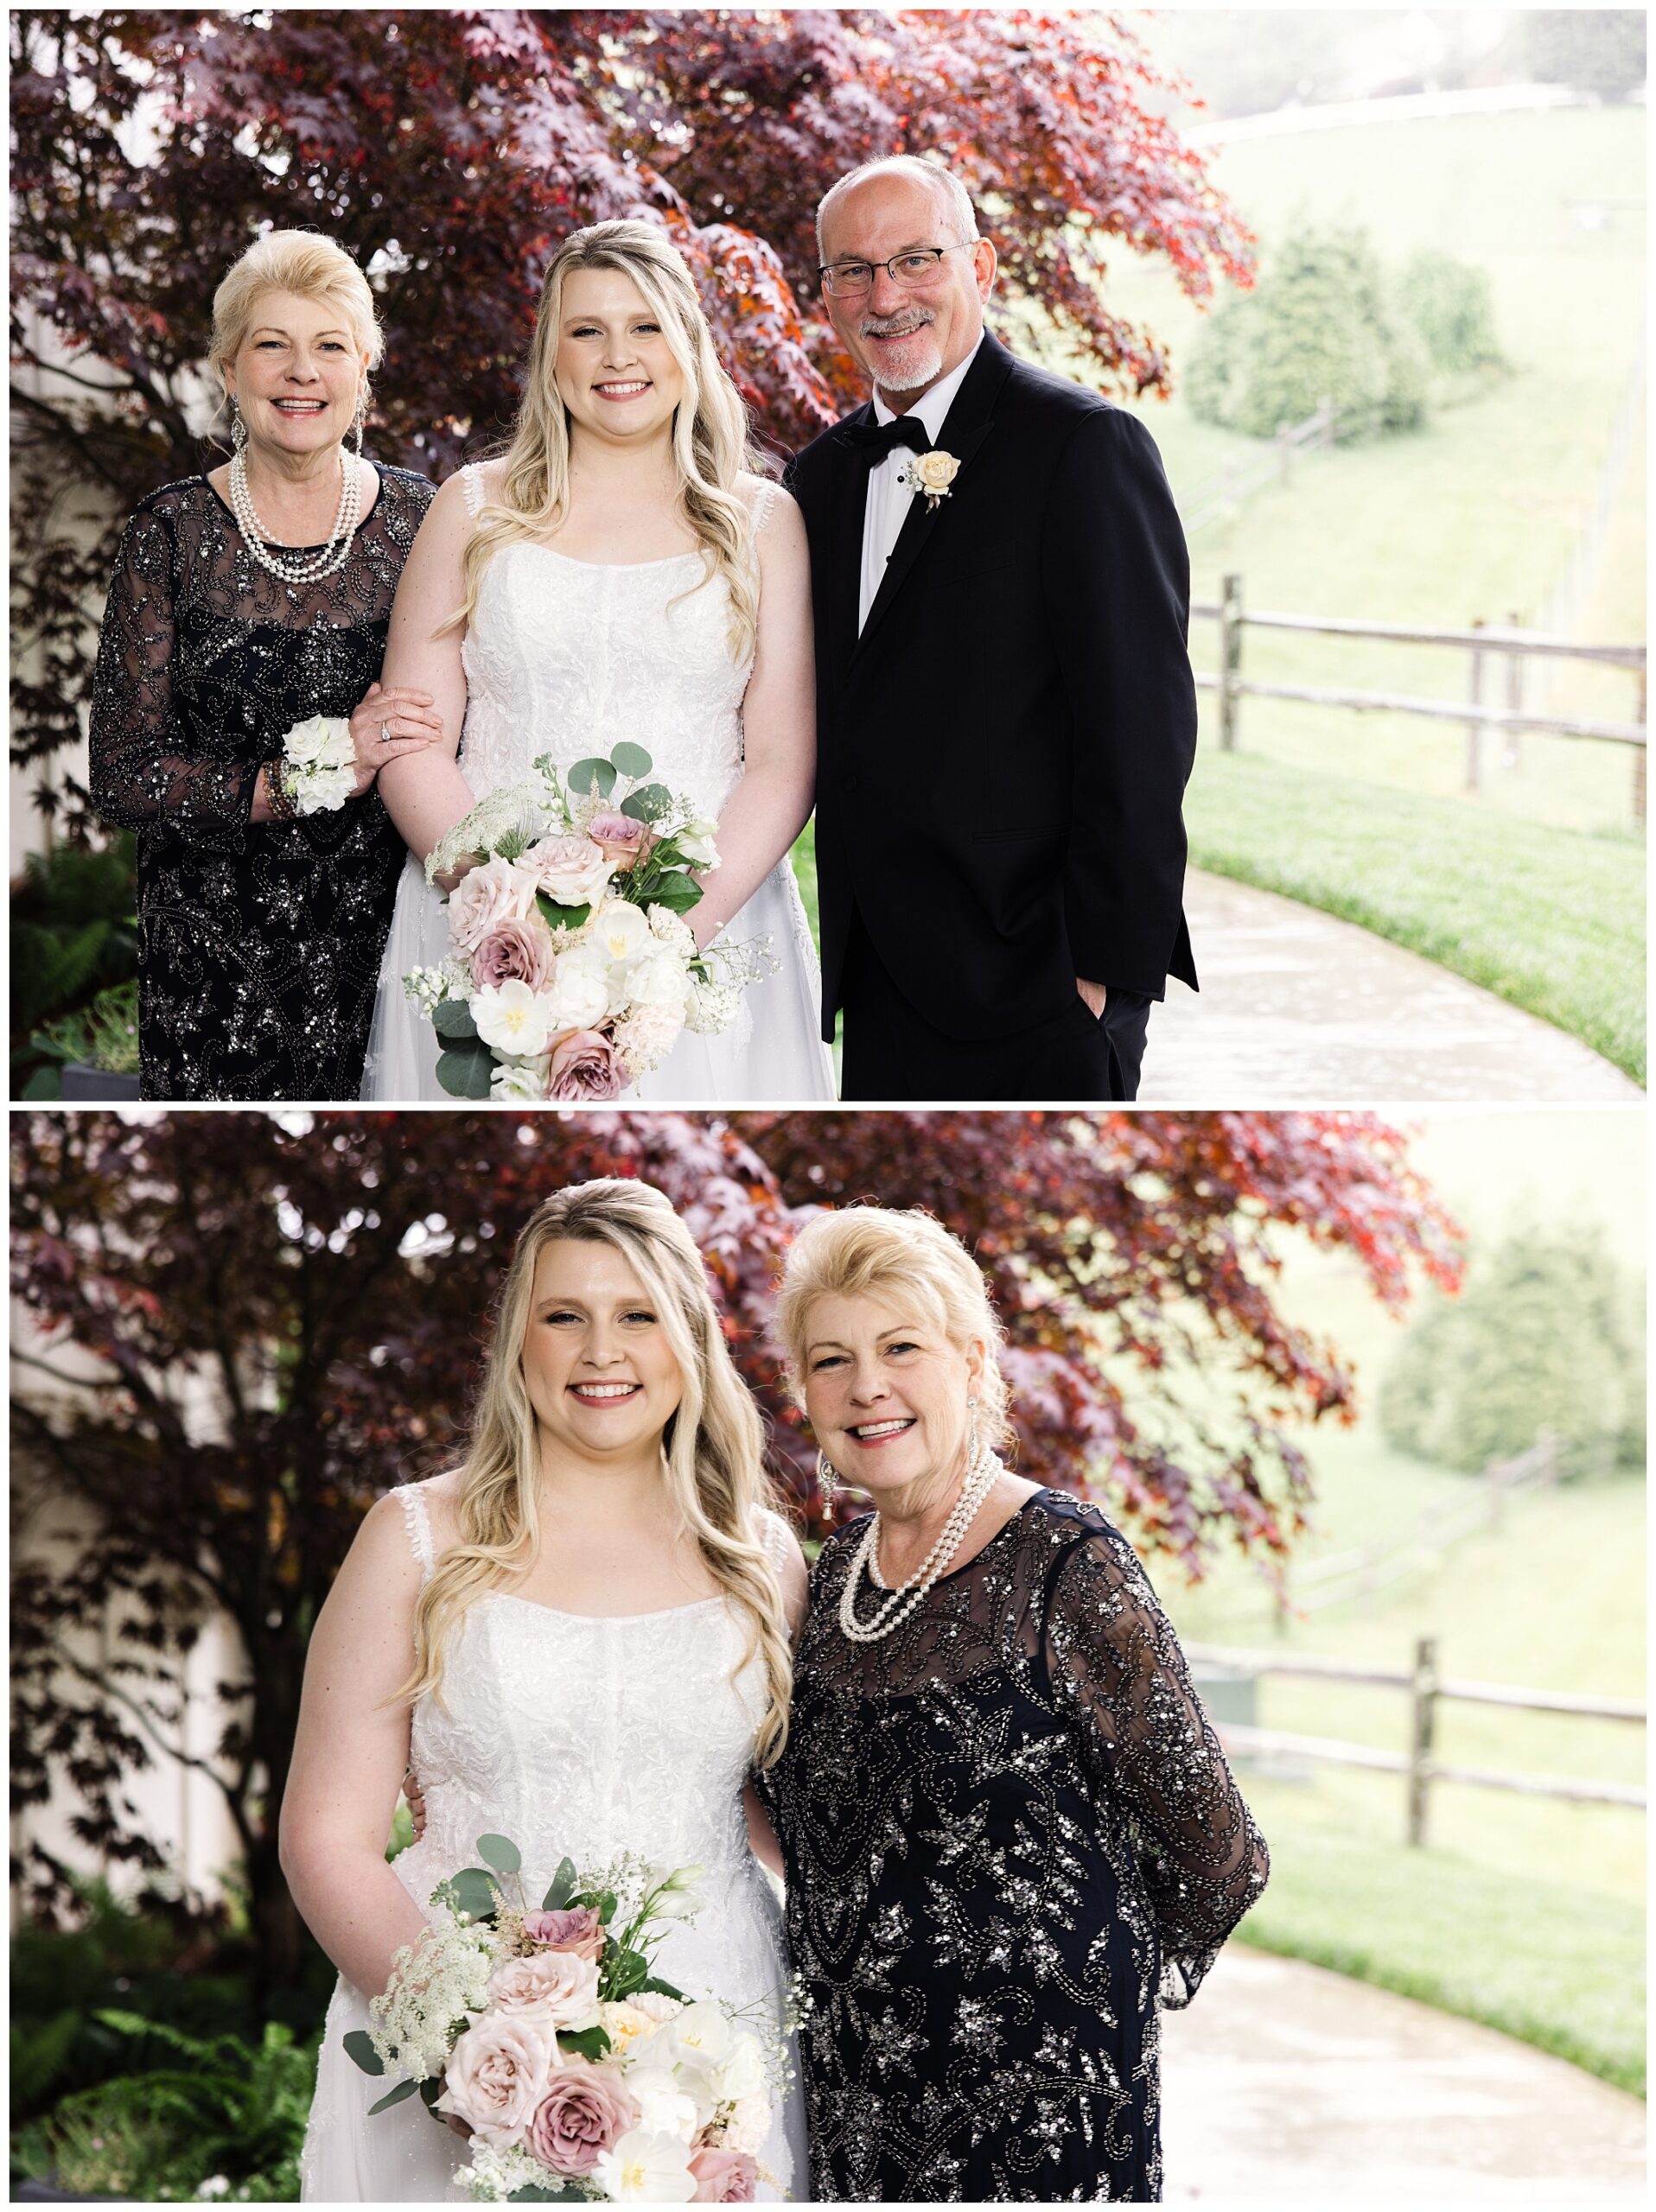 Bride in white dress with parents in formal wear holding flower bouquet, posing outdoors at Chestnut Ridge. Second image shows bride closely with her mother, both smiling in the mountain rain.